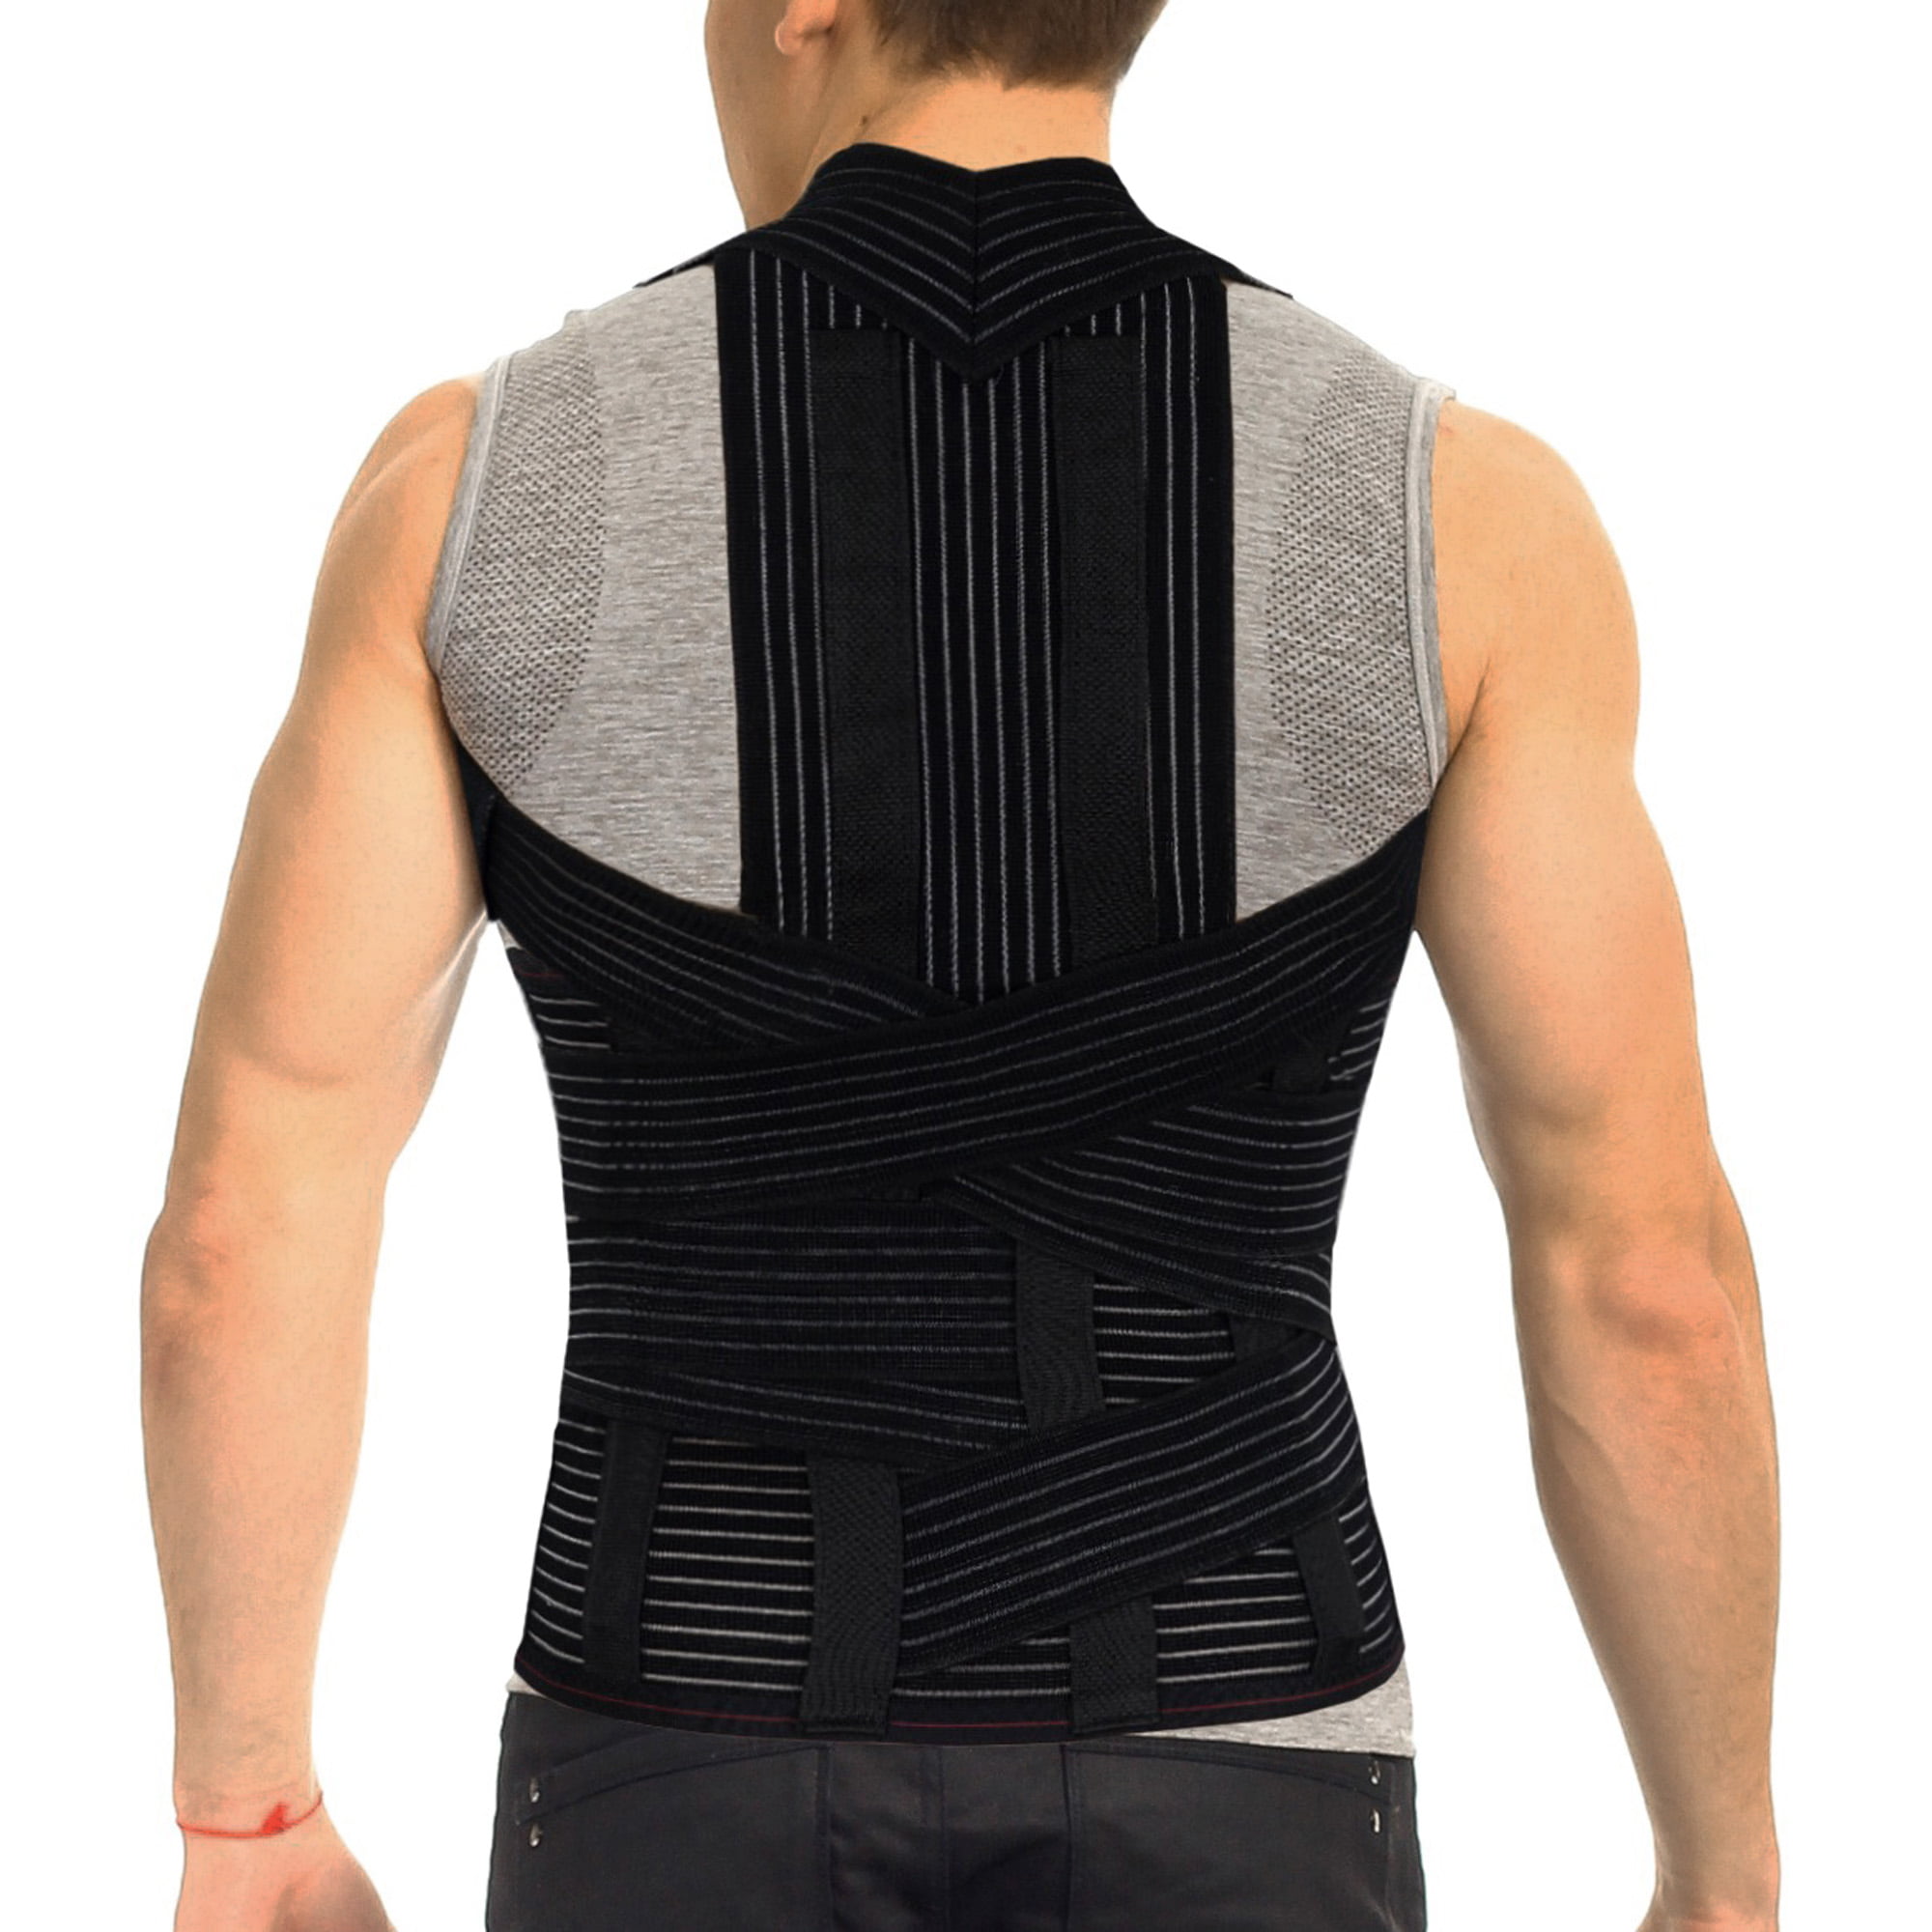 ORTONYX Full Back Support Brace with Removable Dorso-lumbar Pad - Upper and  Lower Back Pain Relief, Thoracic Kyphosis, Rounded Shoulders, Posture  Correction / S 